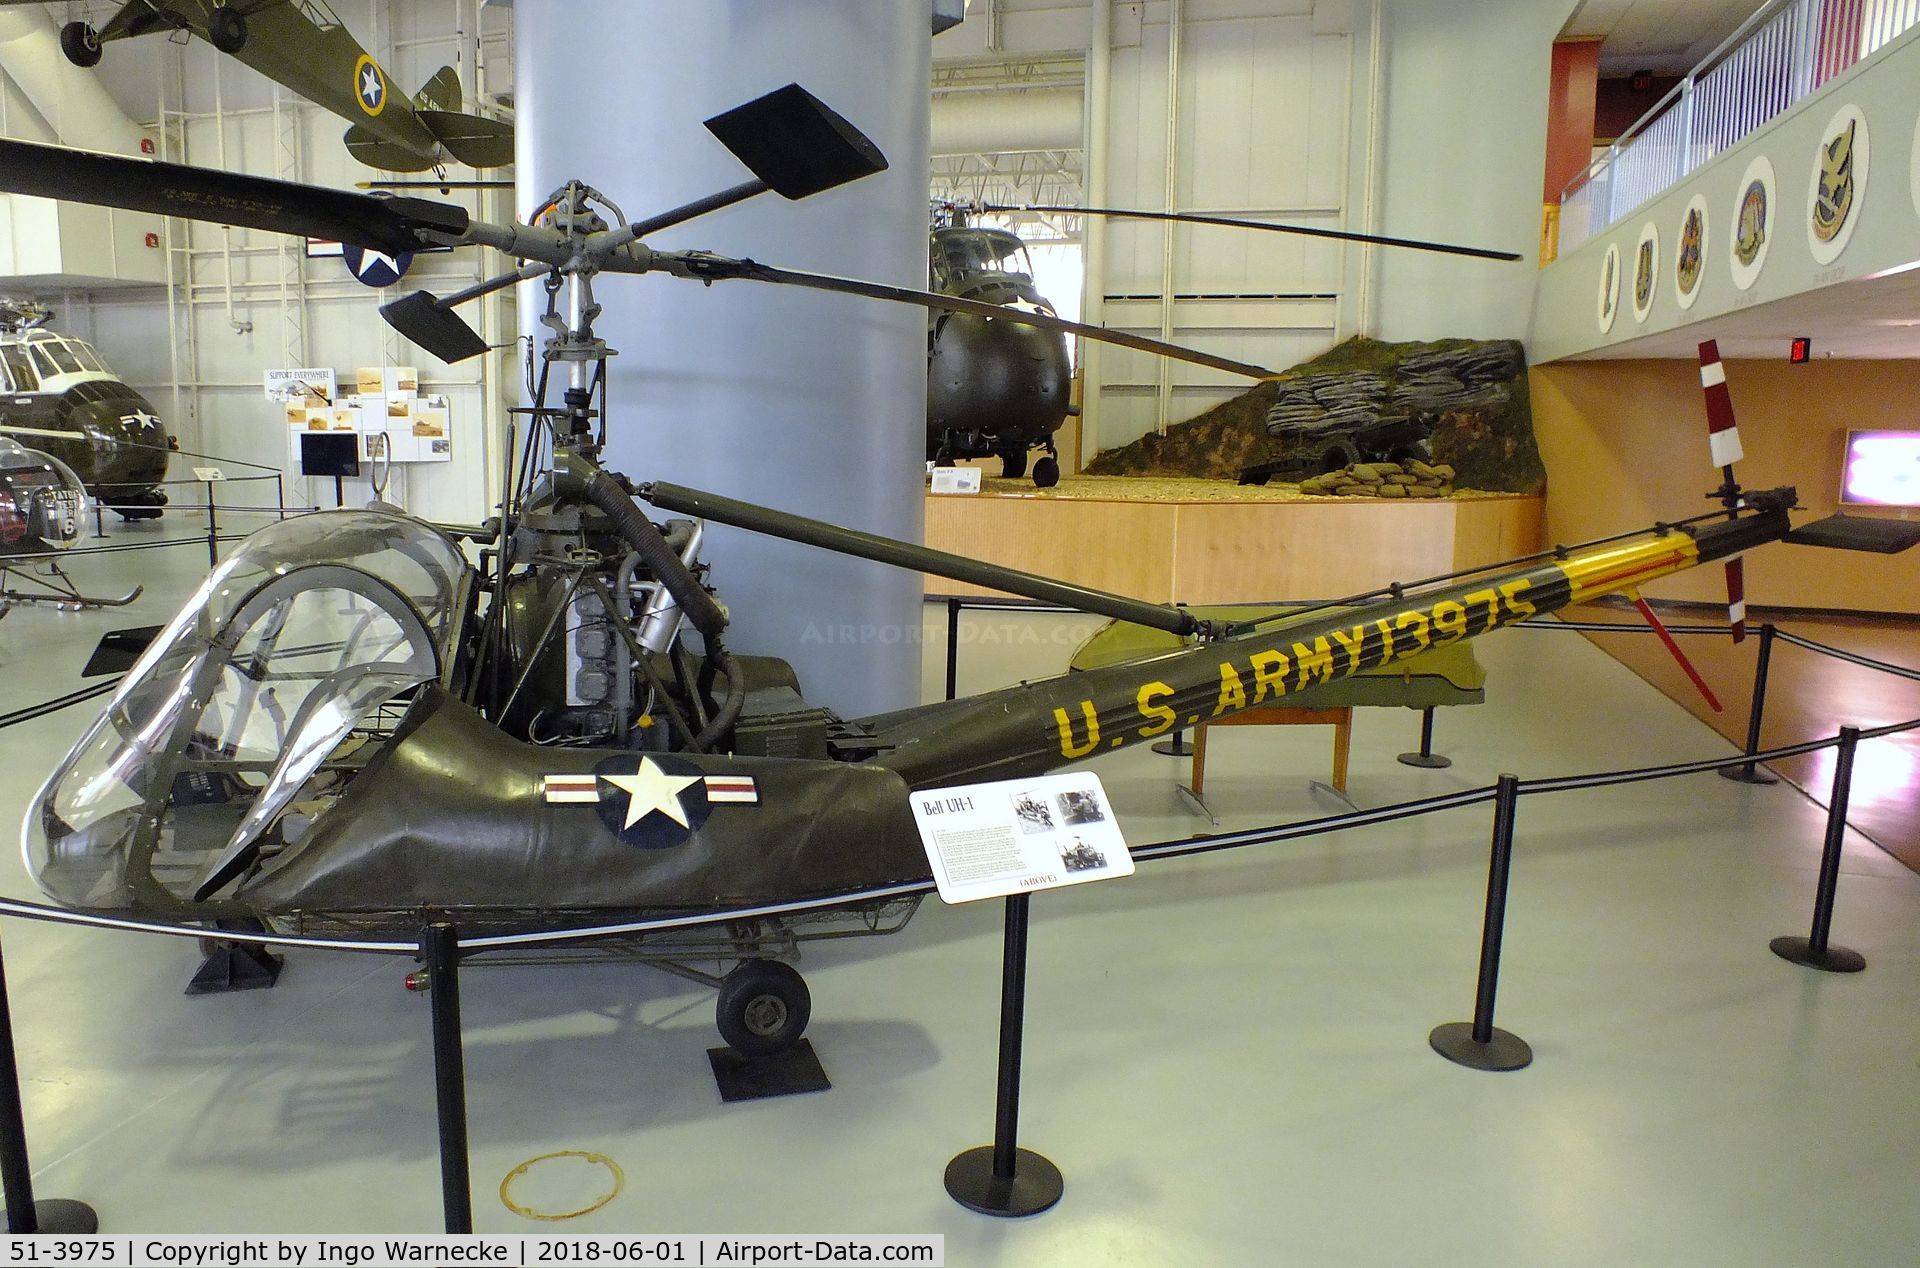 51-3975, 1951 Hiller UH-23B Raven C/N 188, Hiller UH-23B Raven at the US Army Aviation Museum, Ft. Rucker